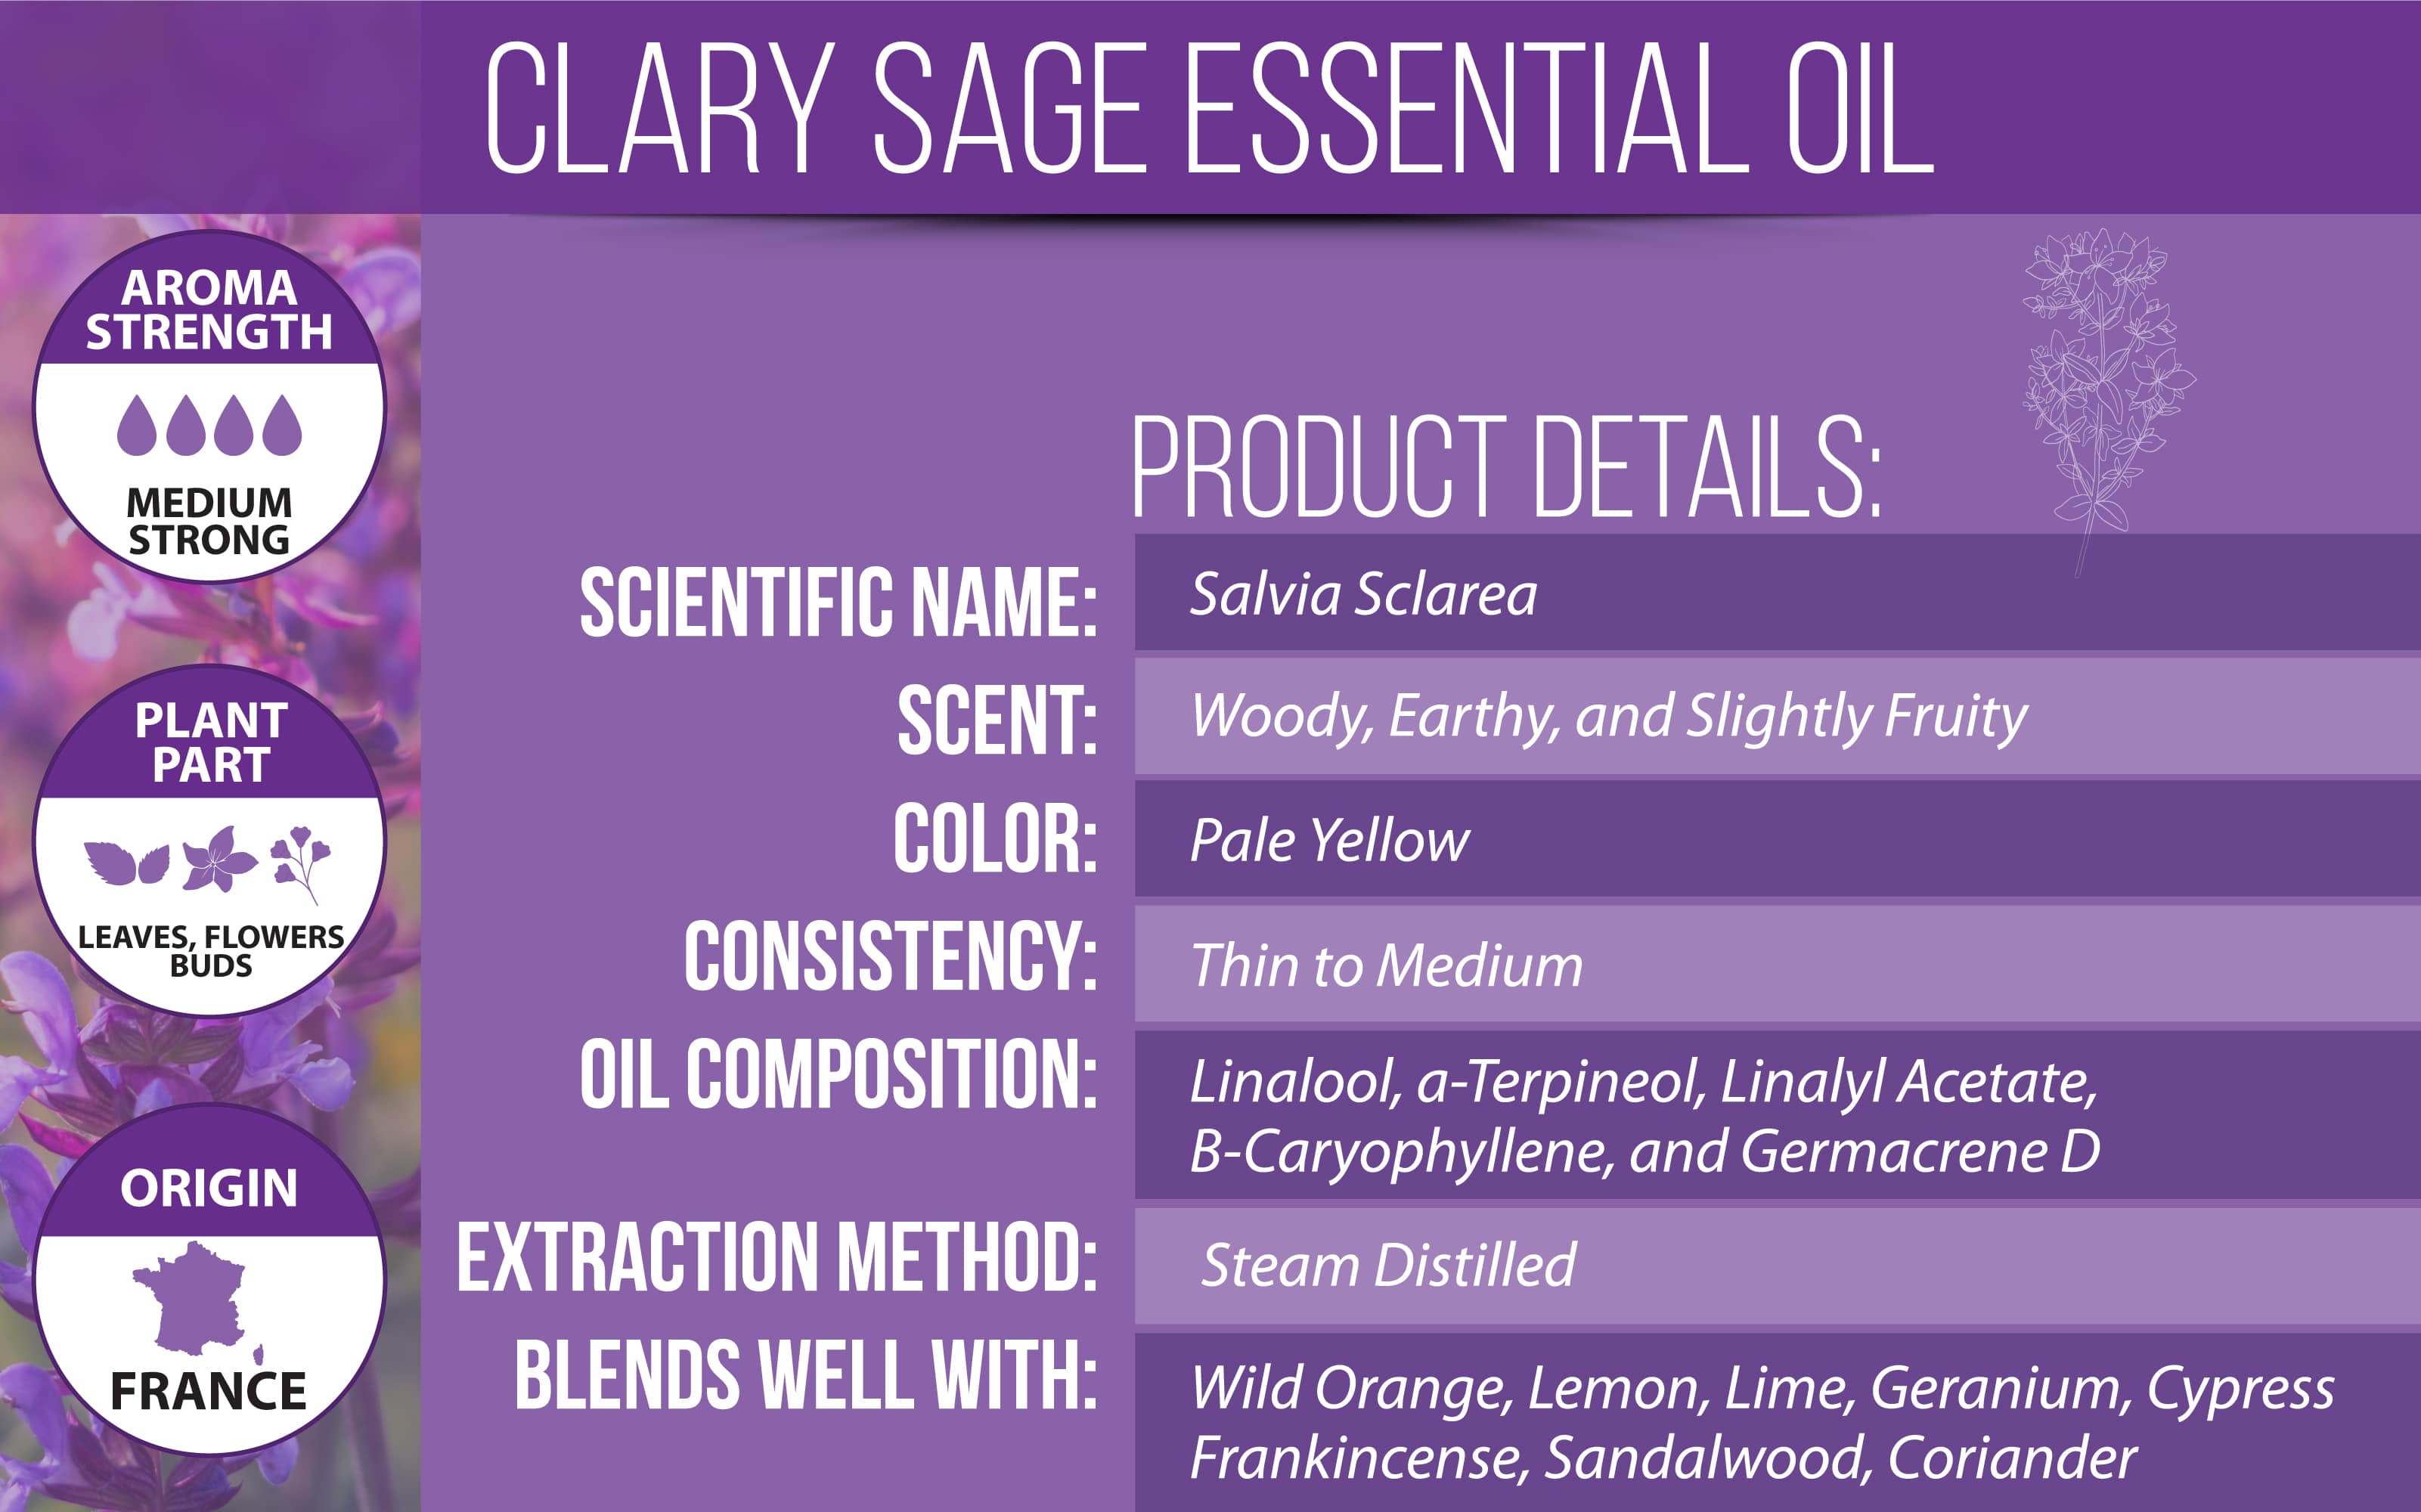 Clary Sage Essential Oil Product Details